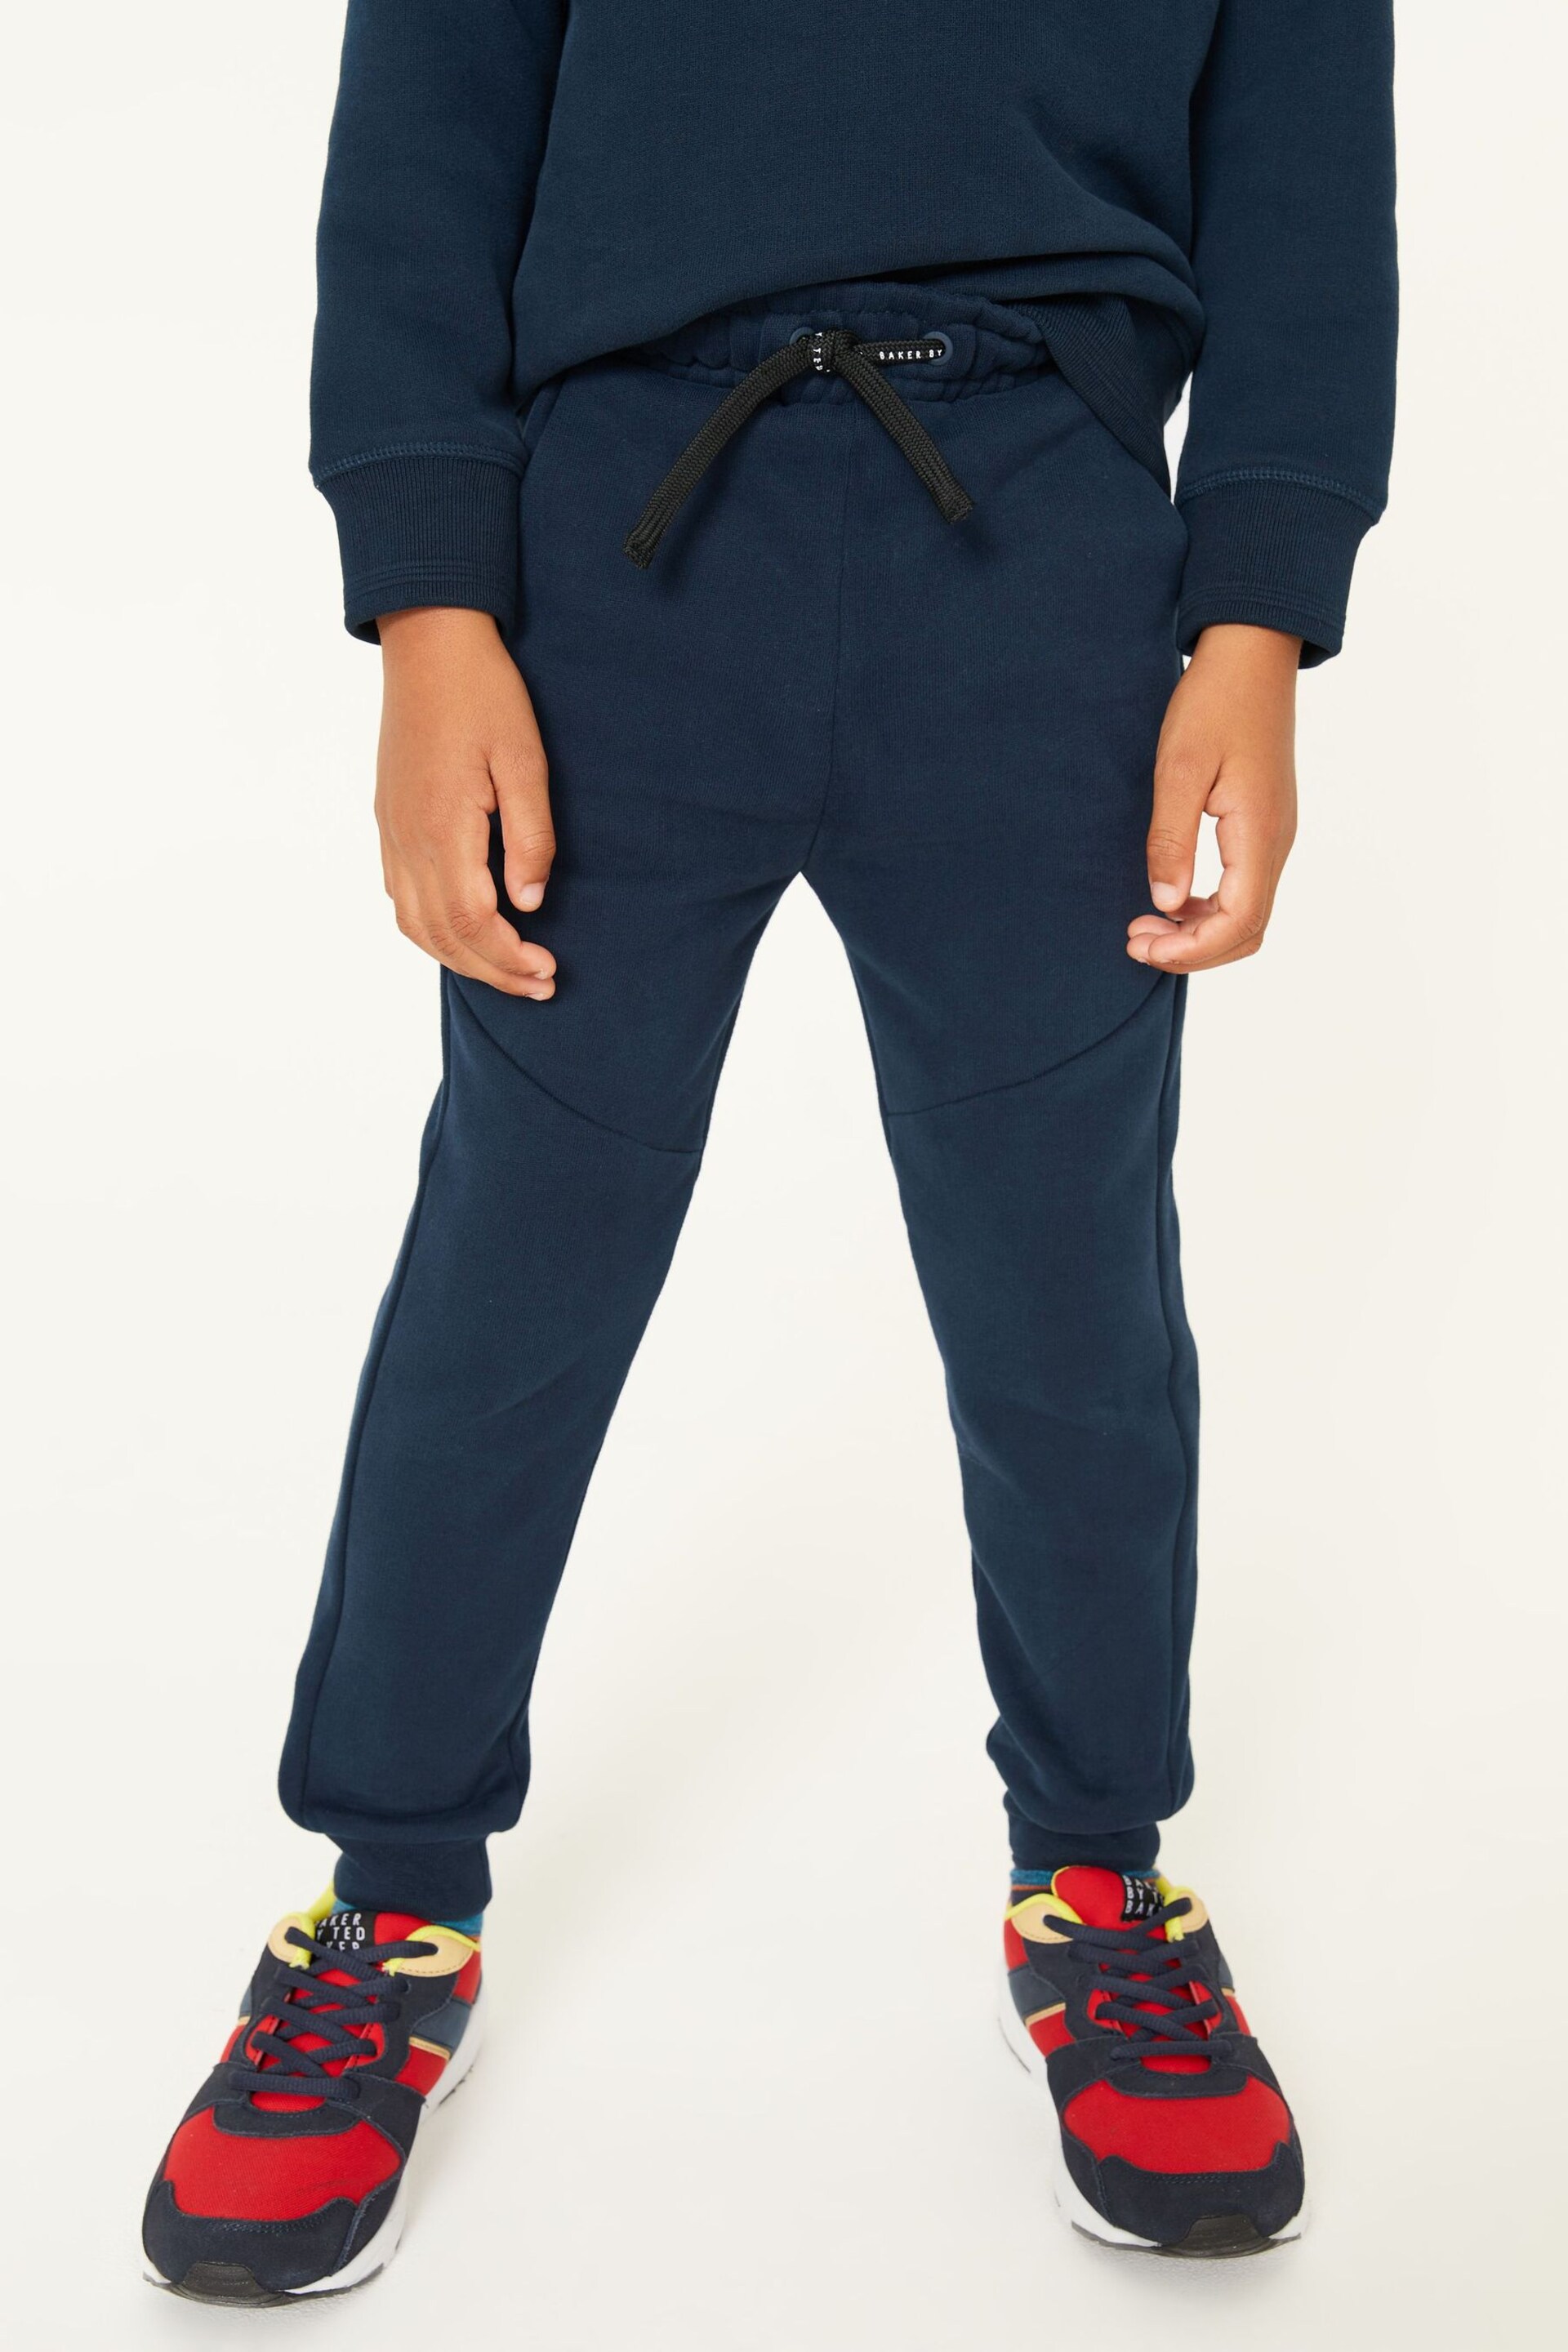 Baker by Ted Baker Joggers - Image 1 of 10